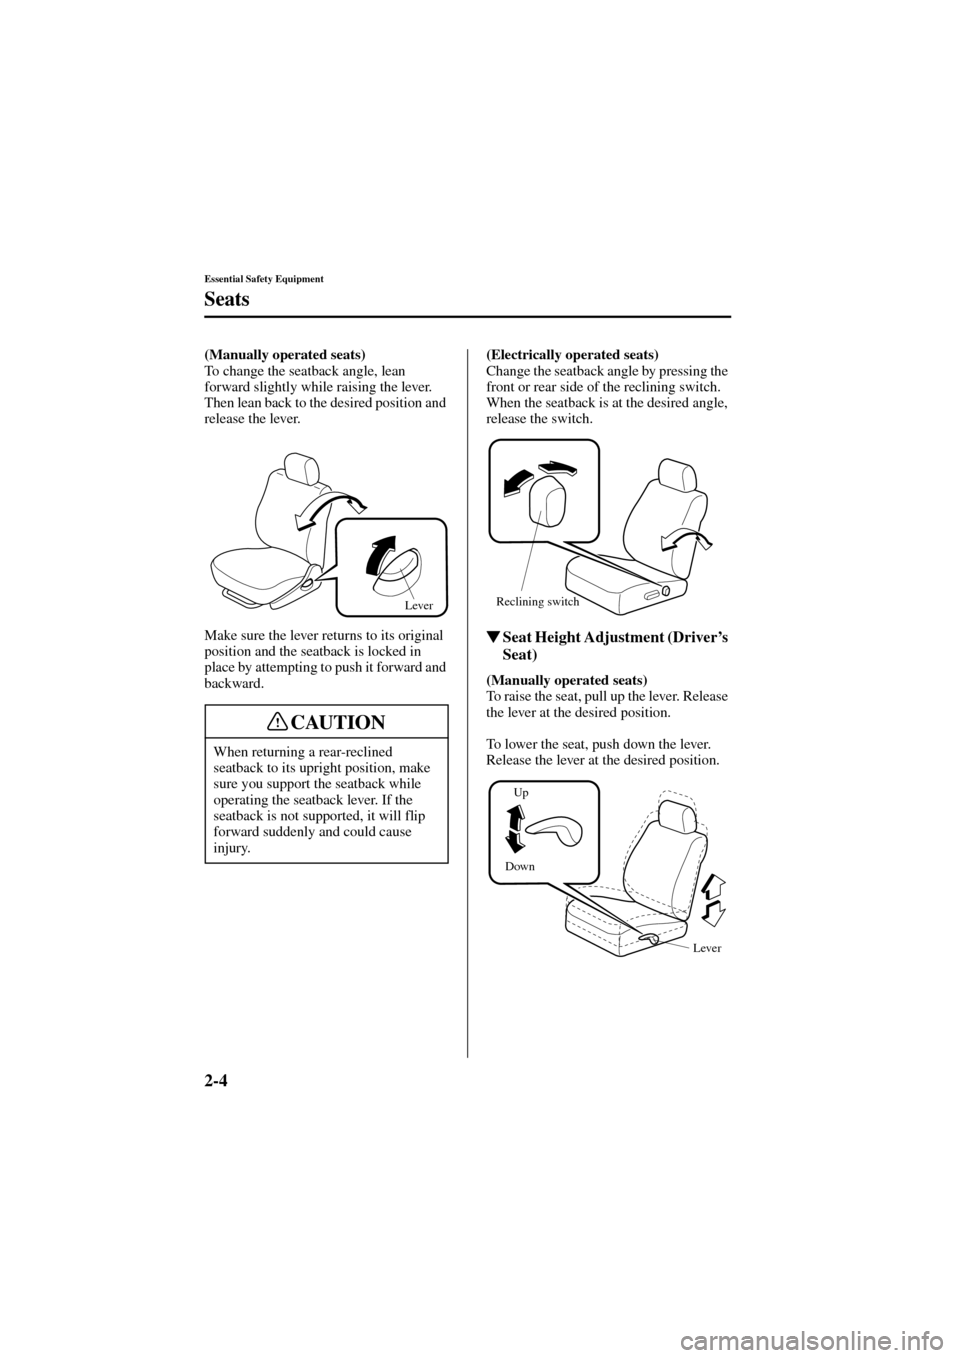 MAZDA MODEL 6 2004  Owners Manual (in English) 2-4
Essential Safety Equipment
Seats
Form No. 8R29-EA-02I
(Manually operated seats)
 
To change the seatback angle, lean 
forward slightly while raising the lever. 
Then lean back to the desired posit